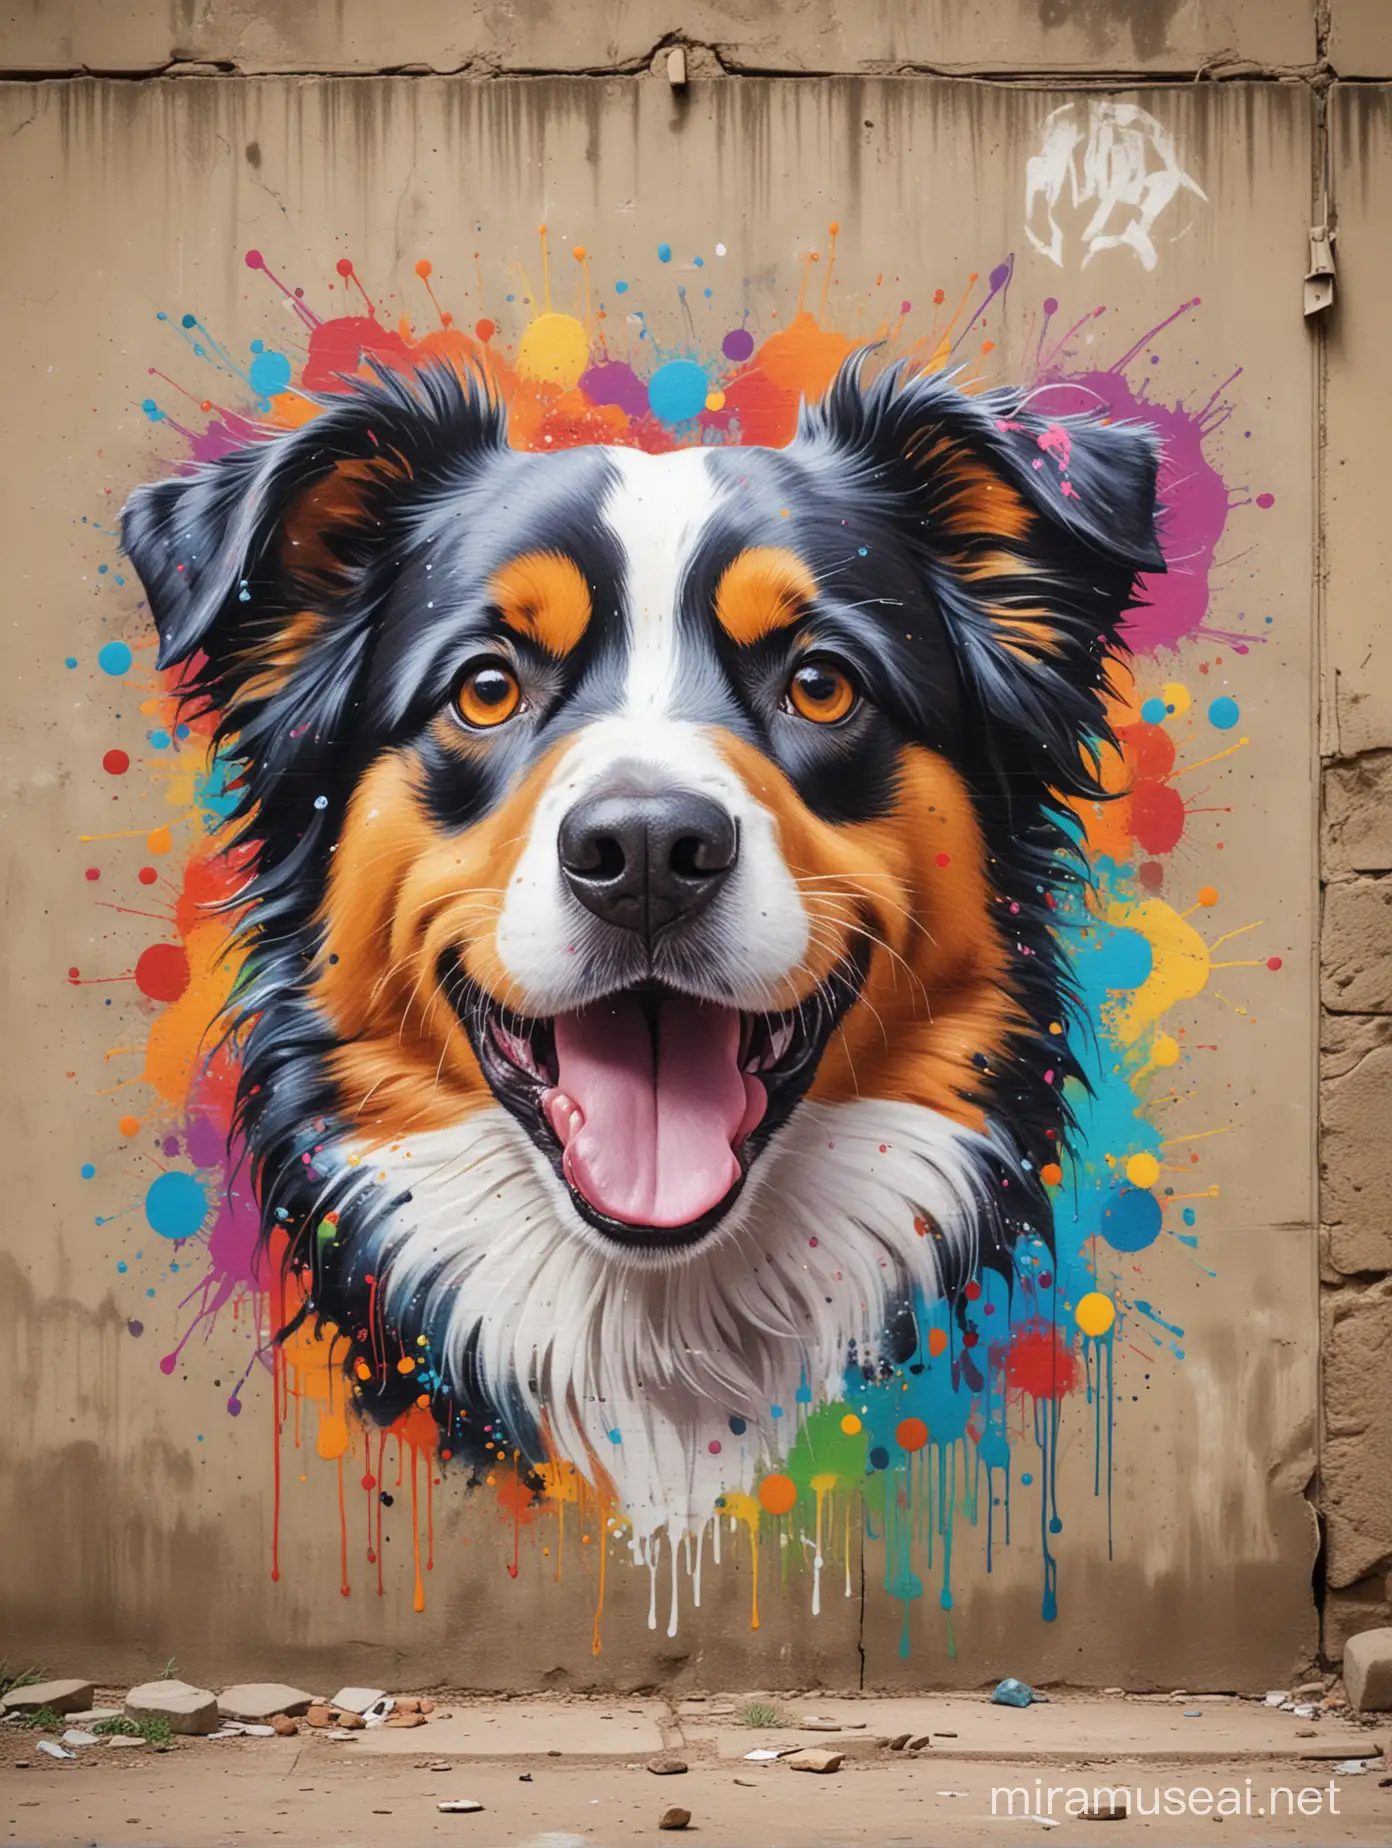 art movement focused on emotional impact through free-flowing shapes and colors, often without depicting real objects,
Create a graffiti of a tiny happy face Australian Shepherd Dog on the foreground, colorful graffiti art, on a wall, rustic background, graffiti art style